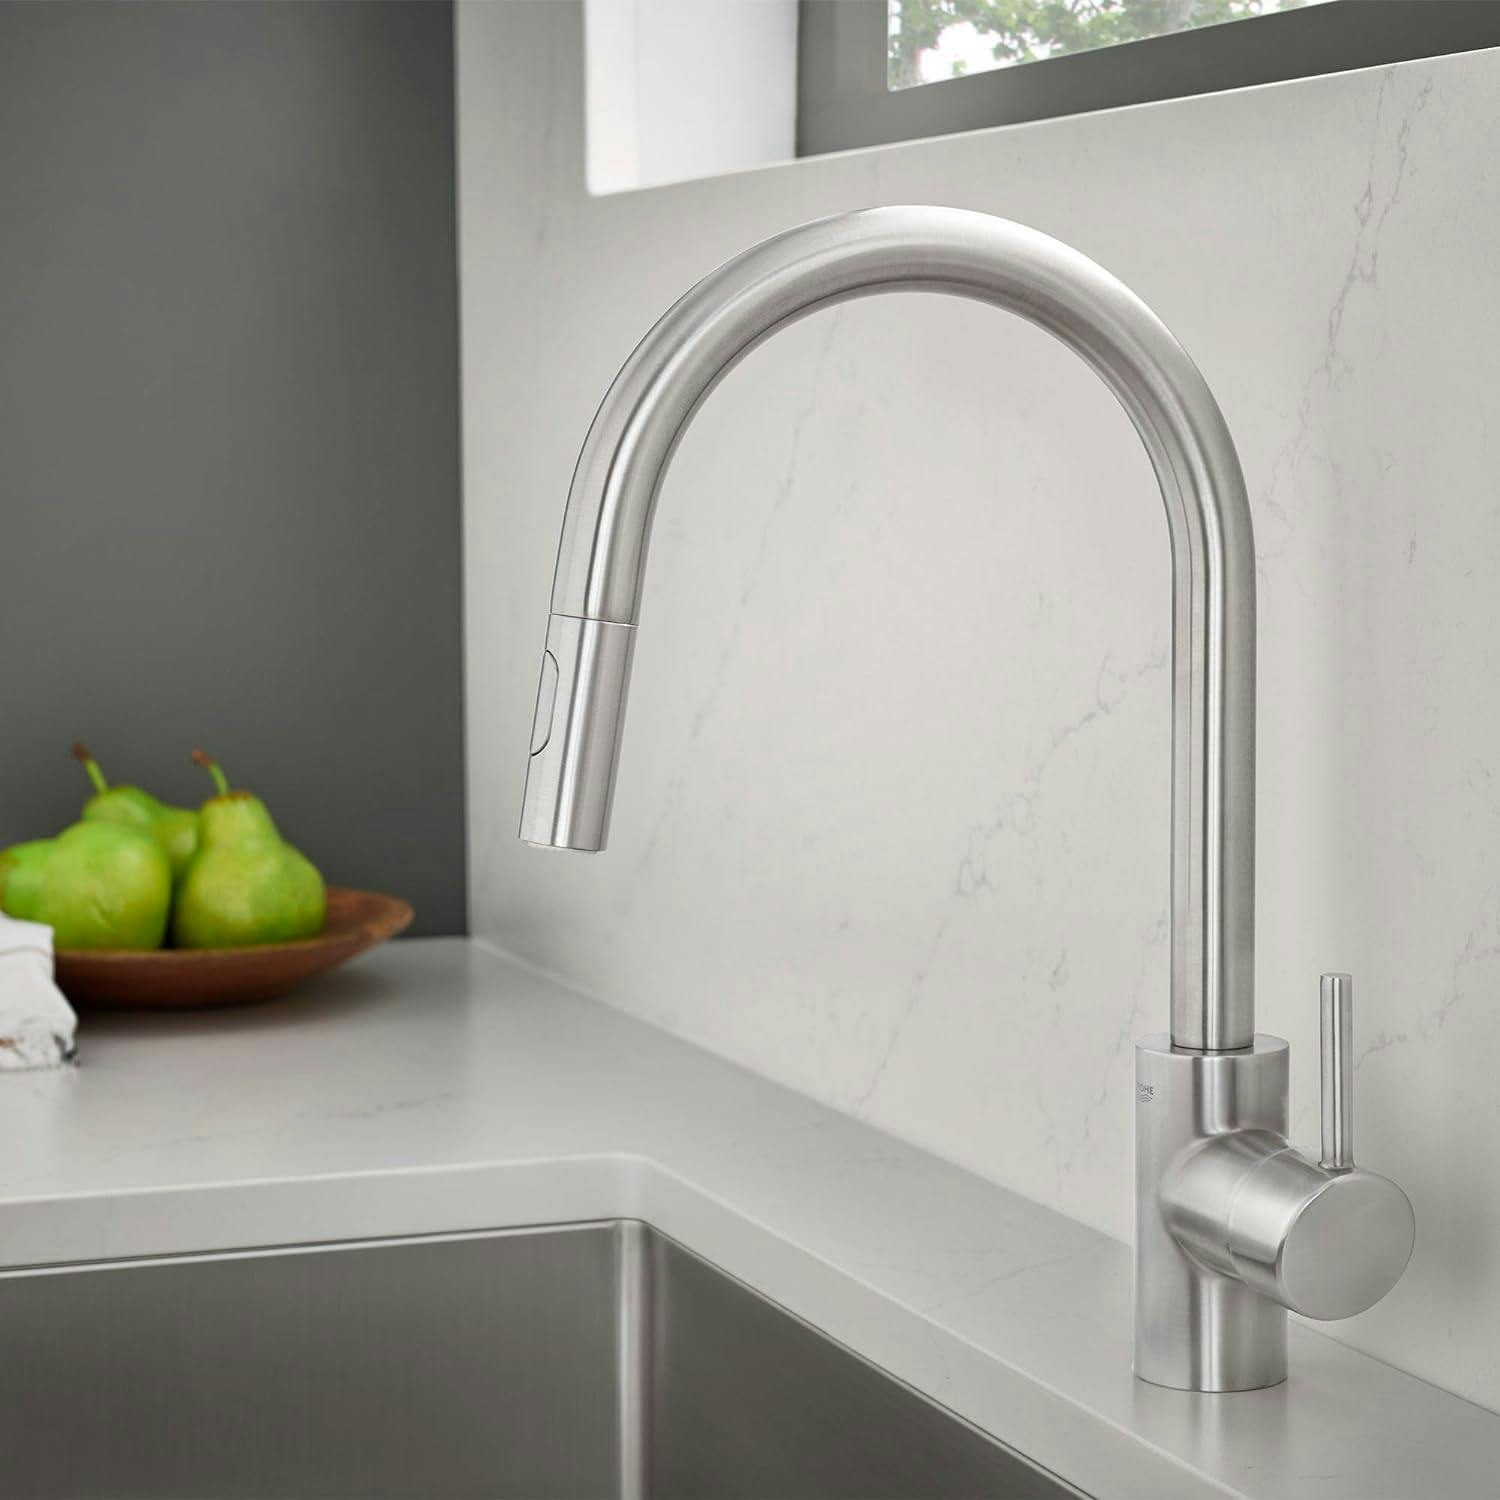 Modern 15" Stainless Steel Pull-Down Kitchen Faucet with Dual Spray